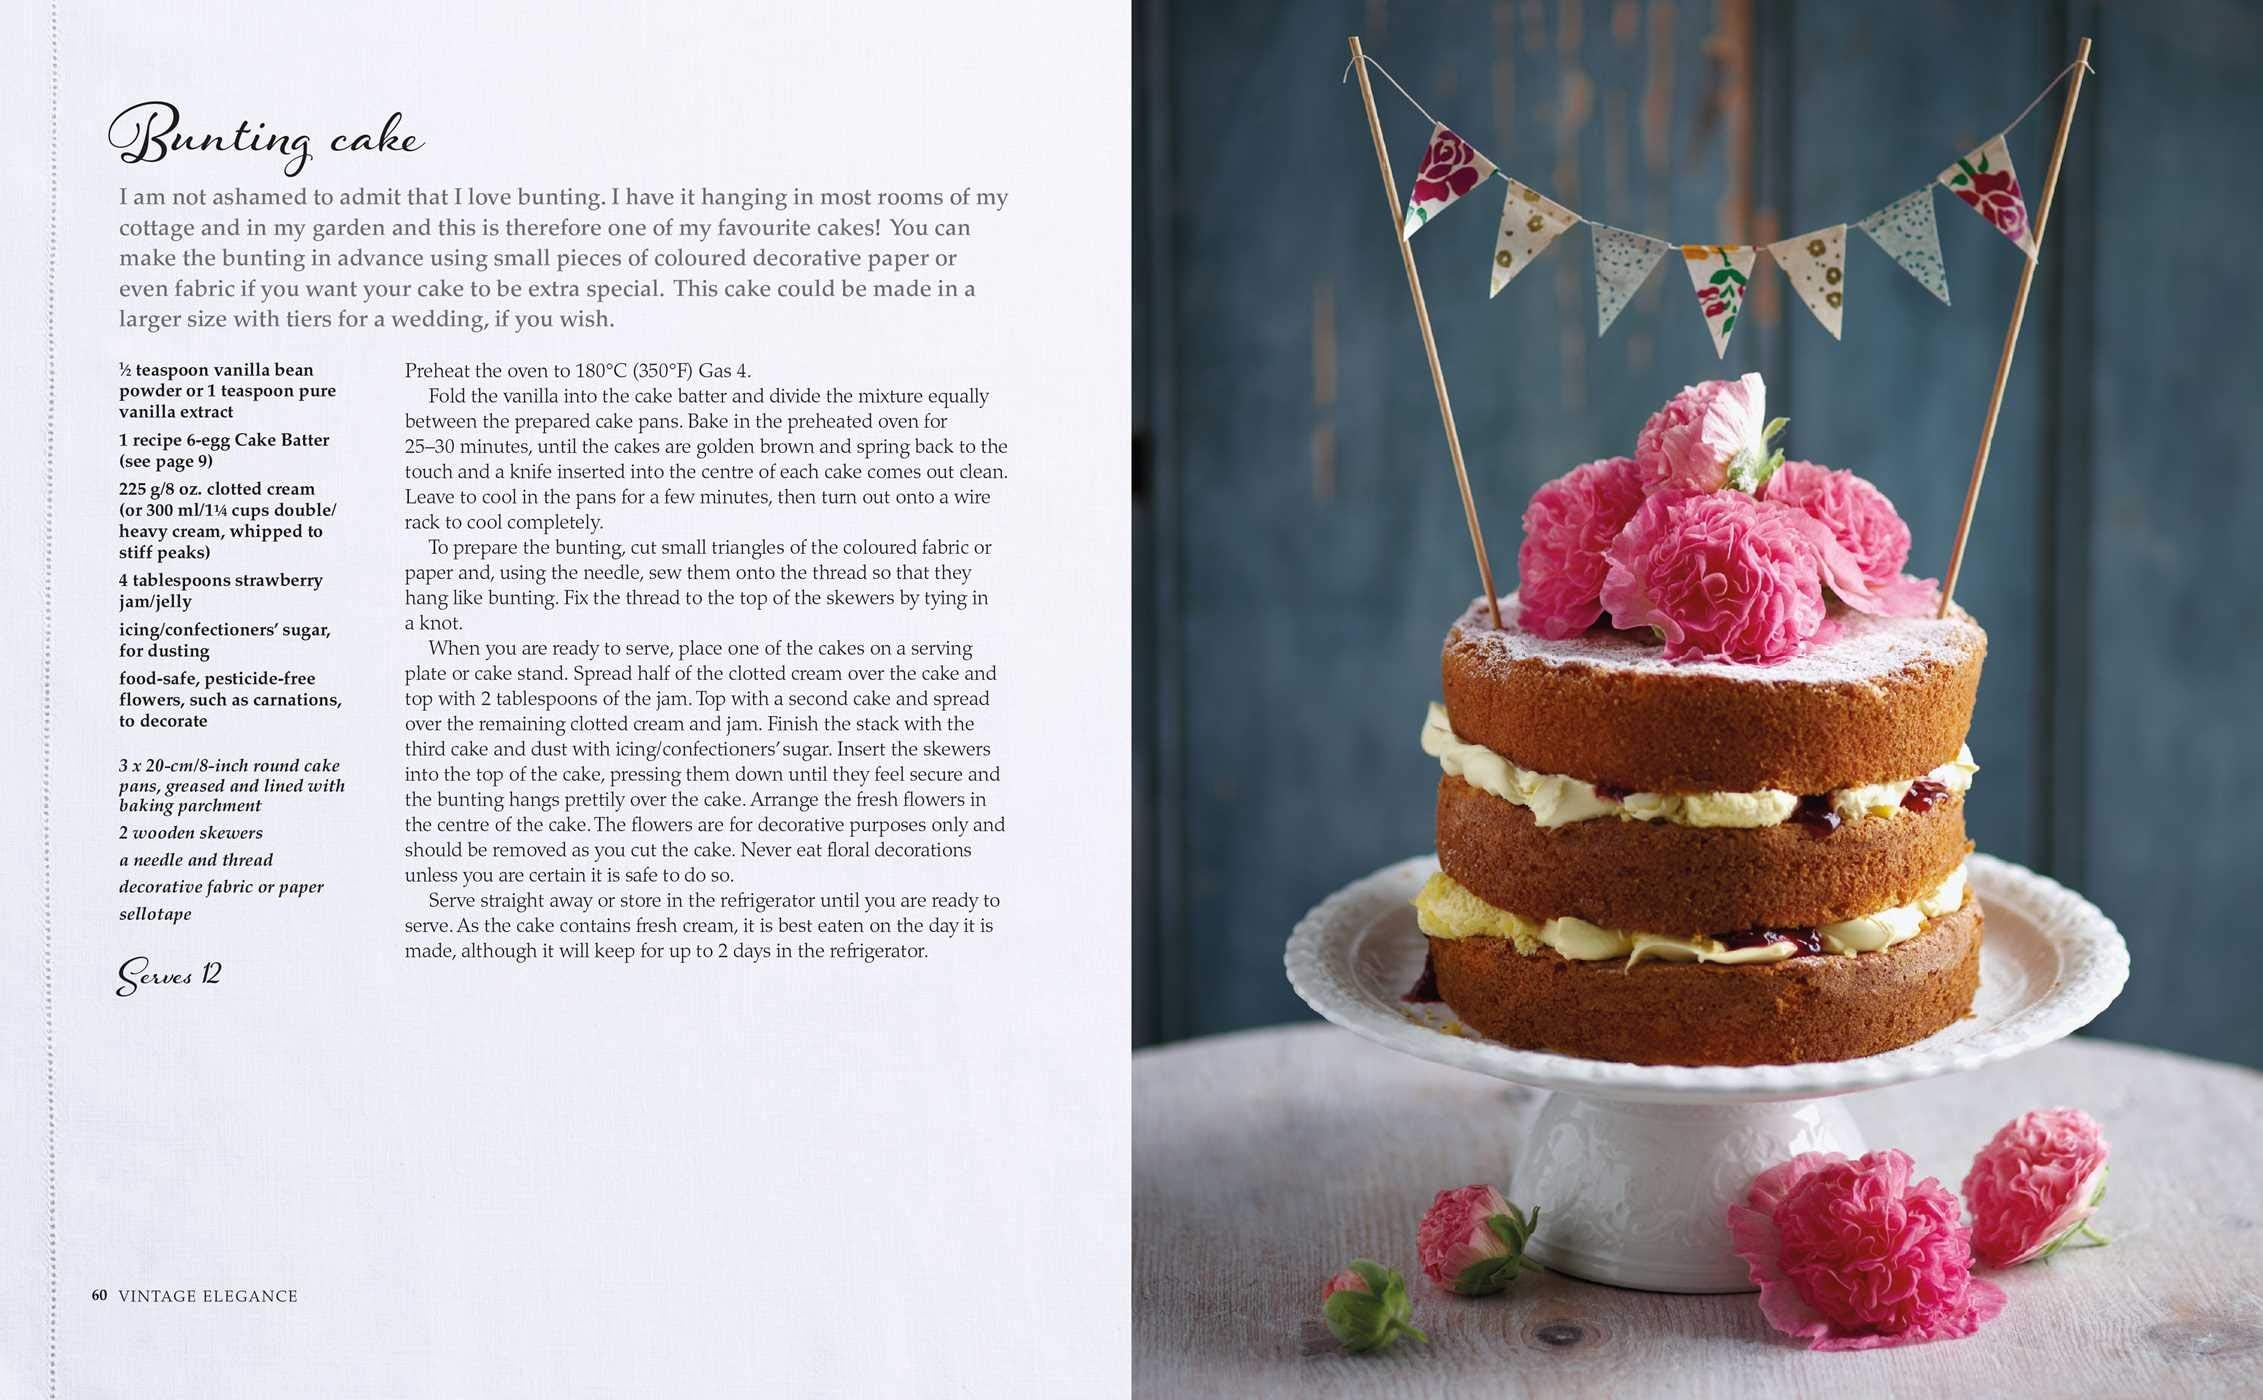 *Sale* Naked Cakes: Simply Stunning Cakes (Hannah Miles)